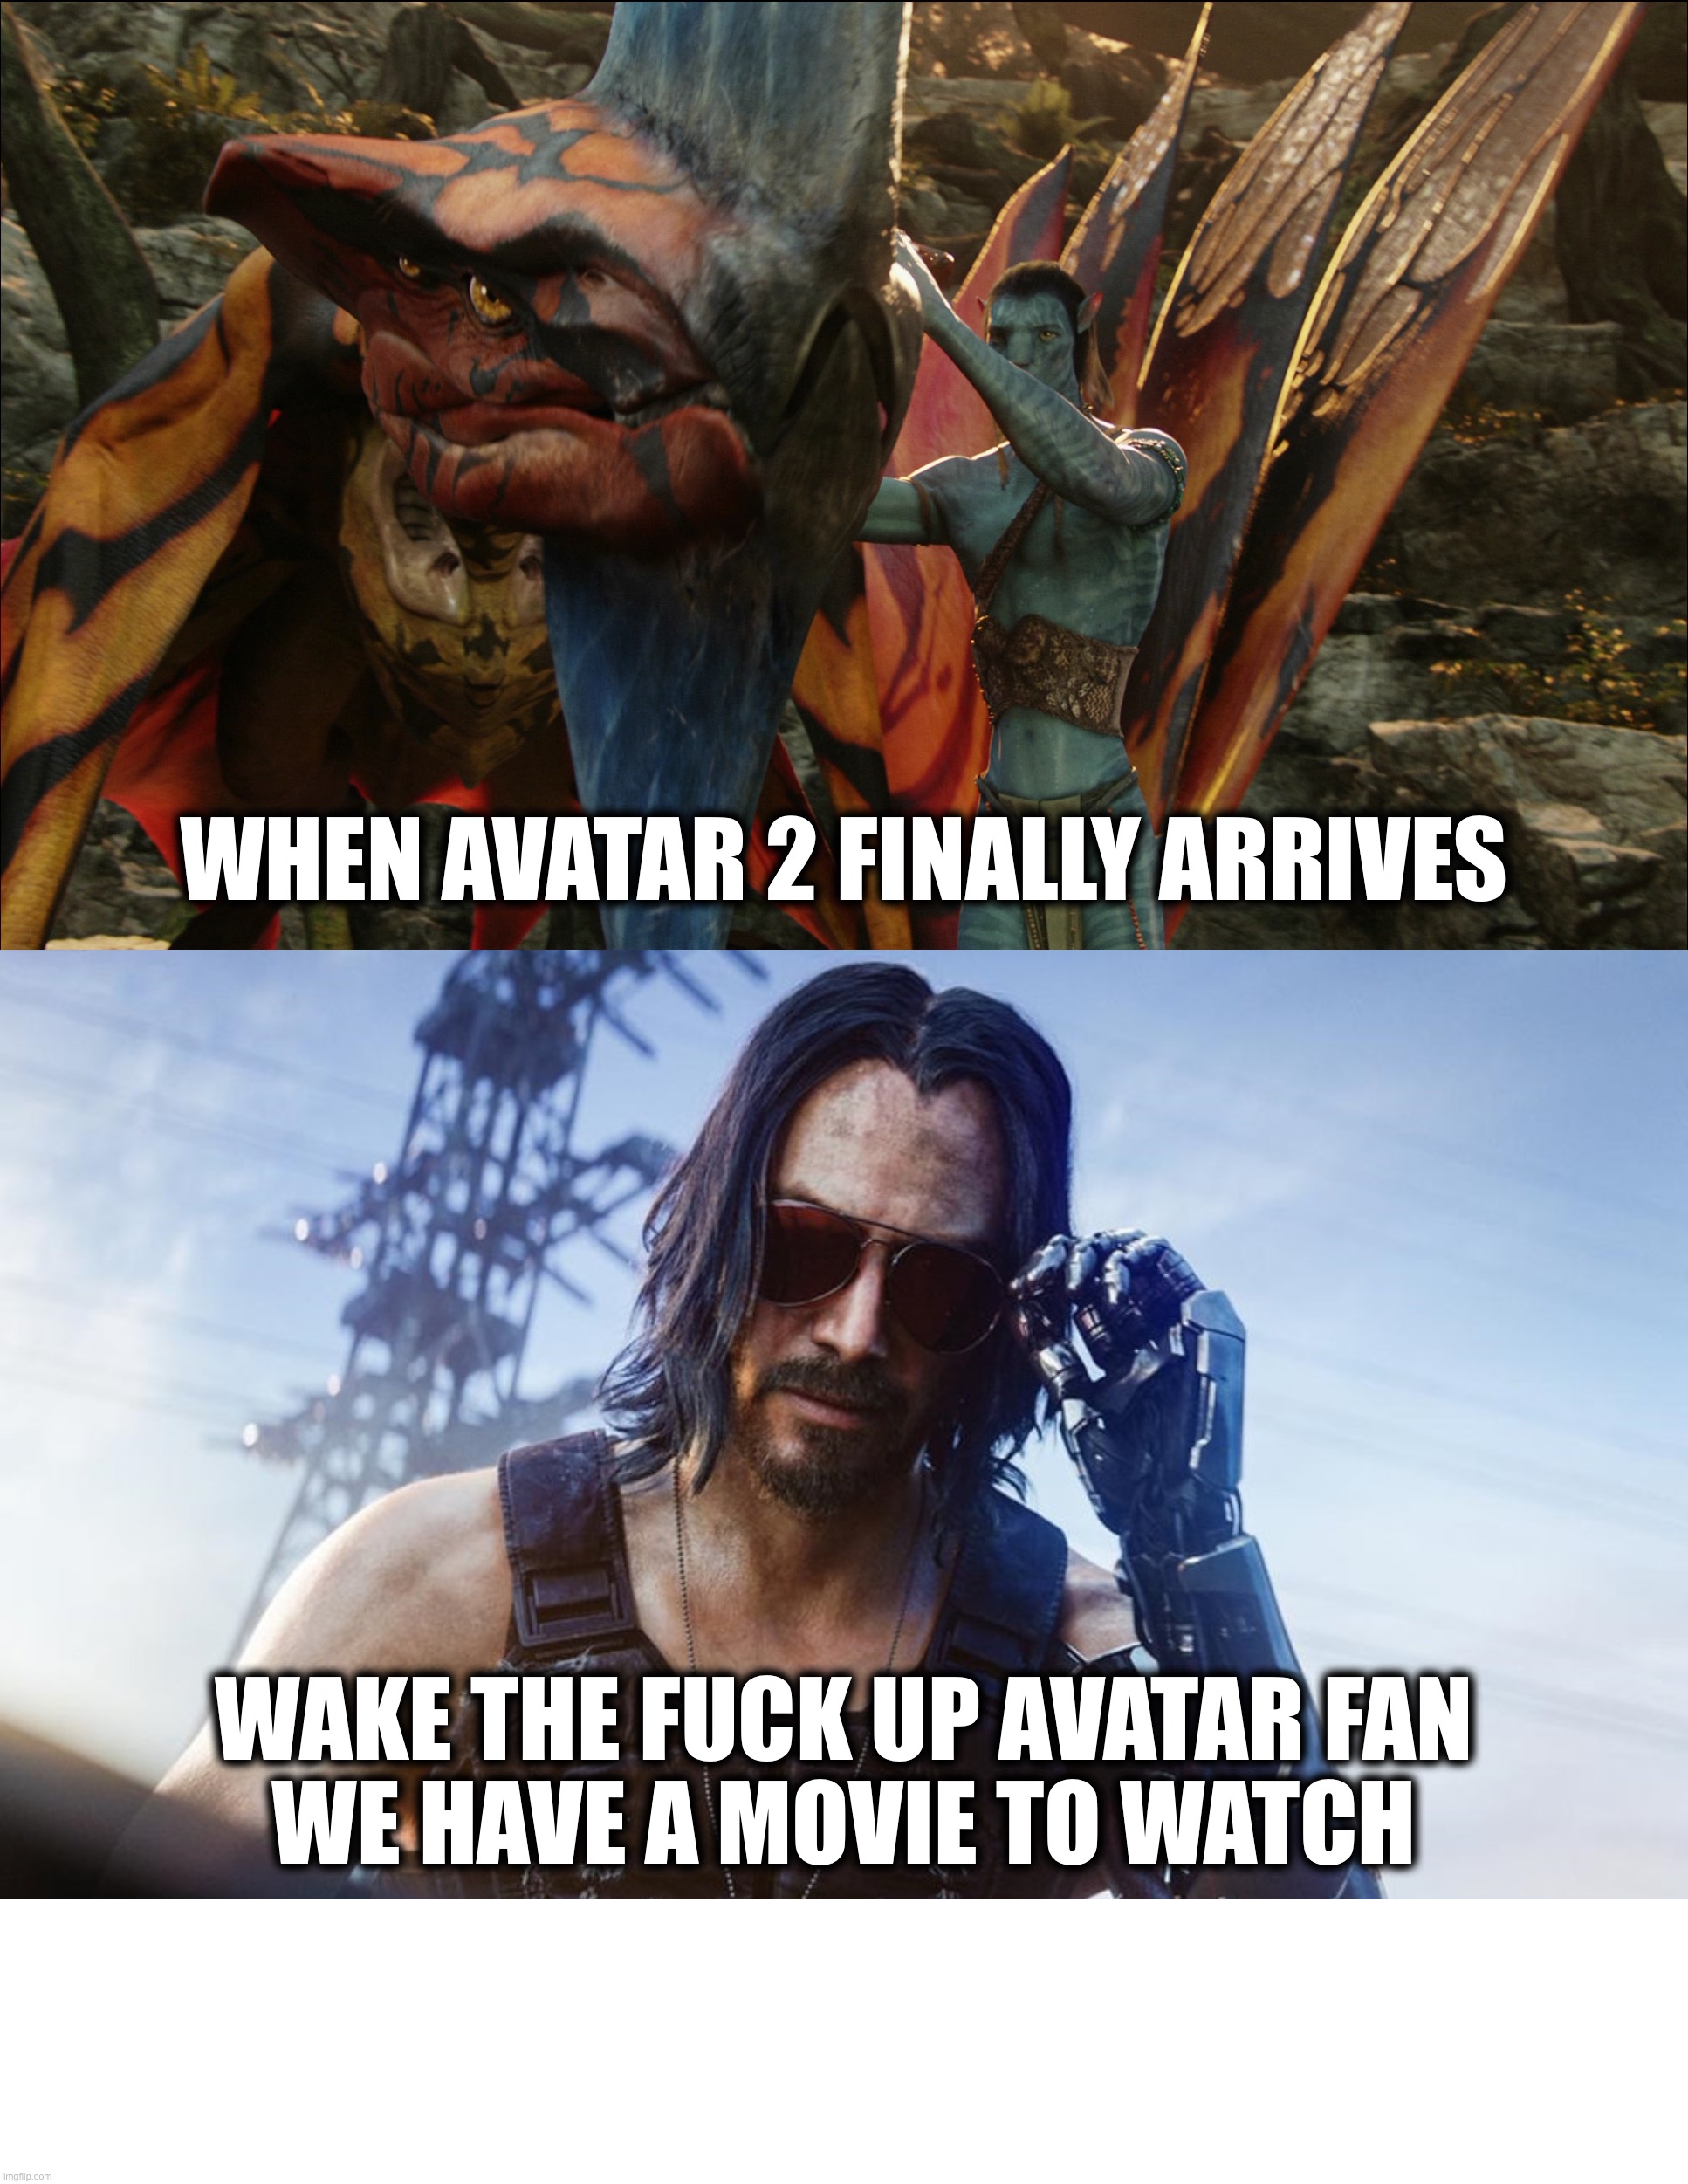 WHEN AVATAR 2 FINALLY ARRIVES; WAKE THE FUCK UP AVATAR FAN
WE HAVE A MOVIE TO WATCH | image tagged in avatar,avatar 2,james cameron,science fiction,keanu reeves,movies | made w/ Imgflip meme maker